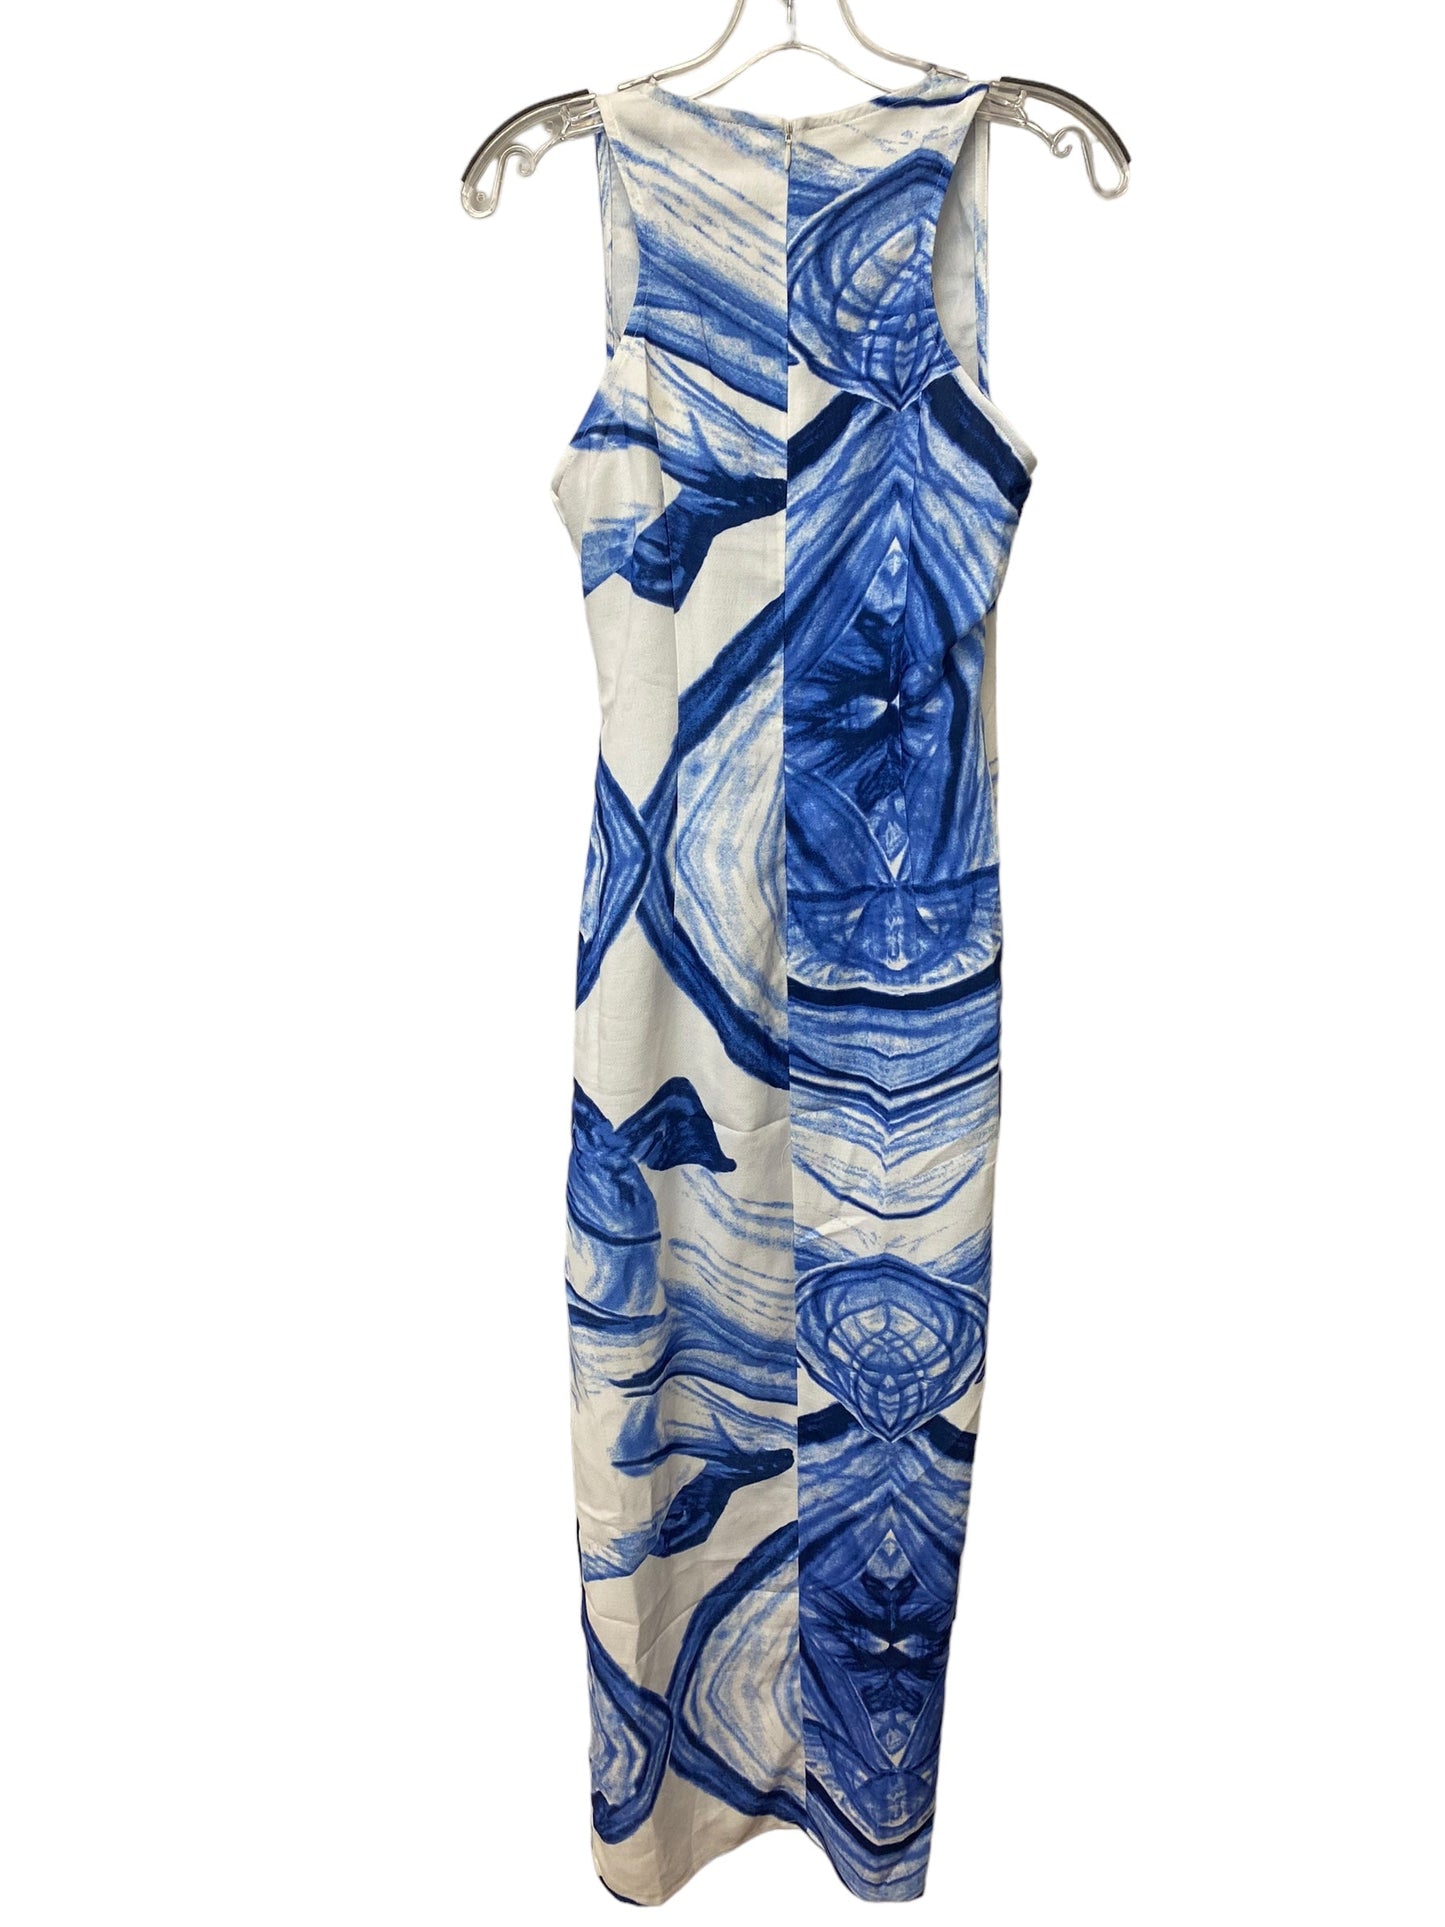 Blue & White Dress Casual Maxi Clothes Mentor, Size M